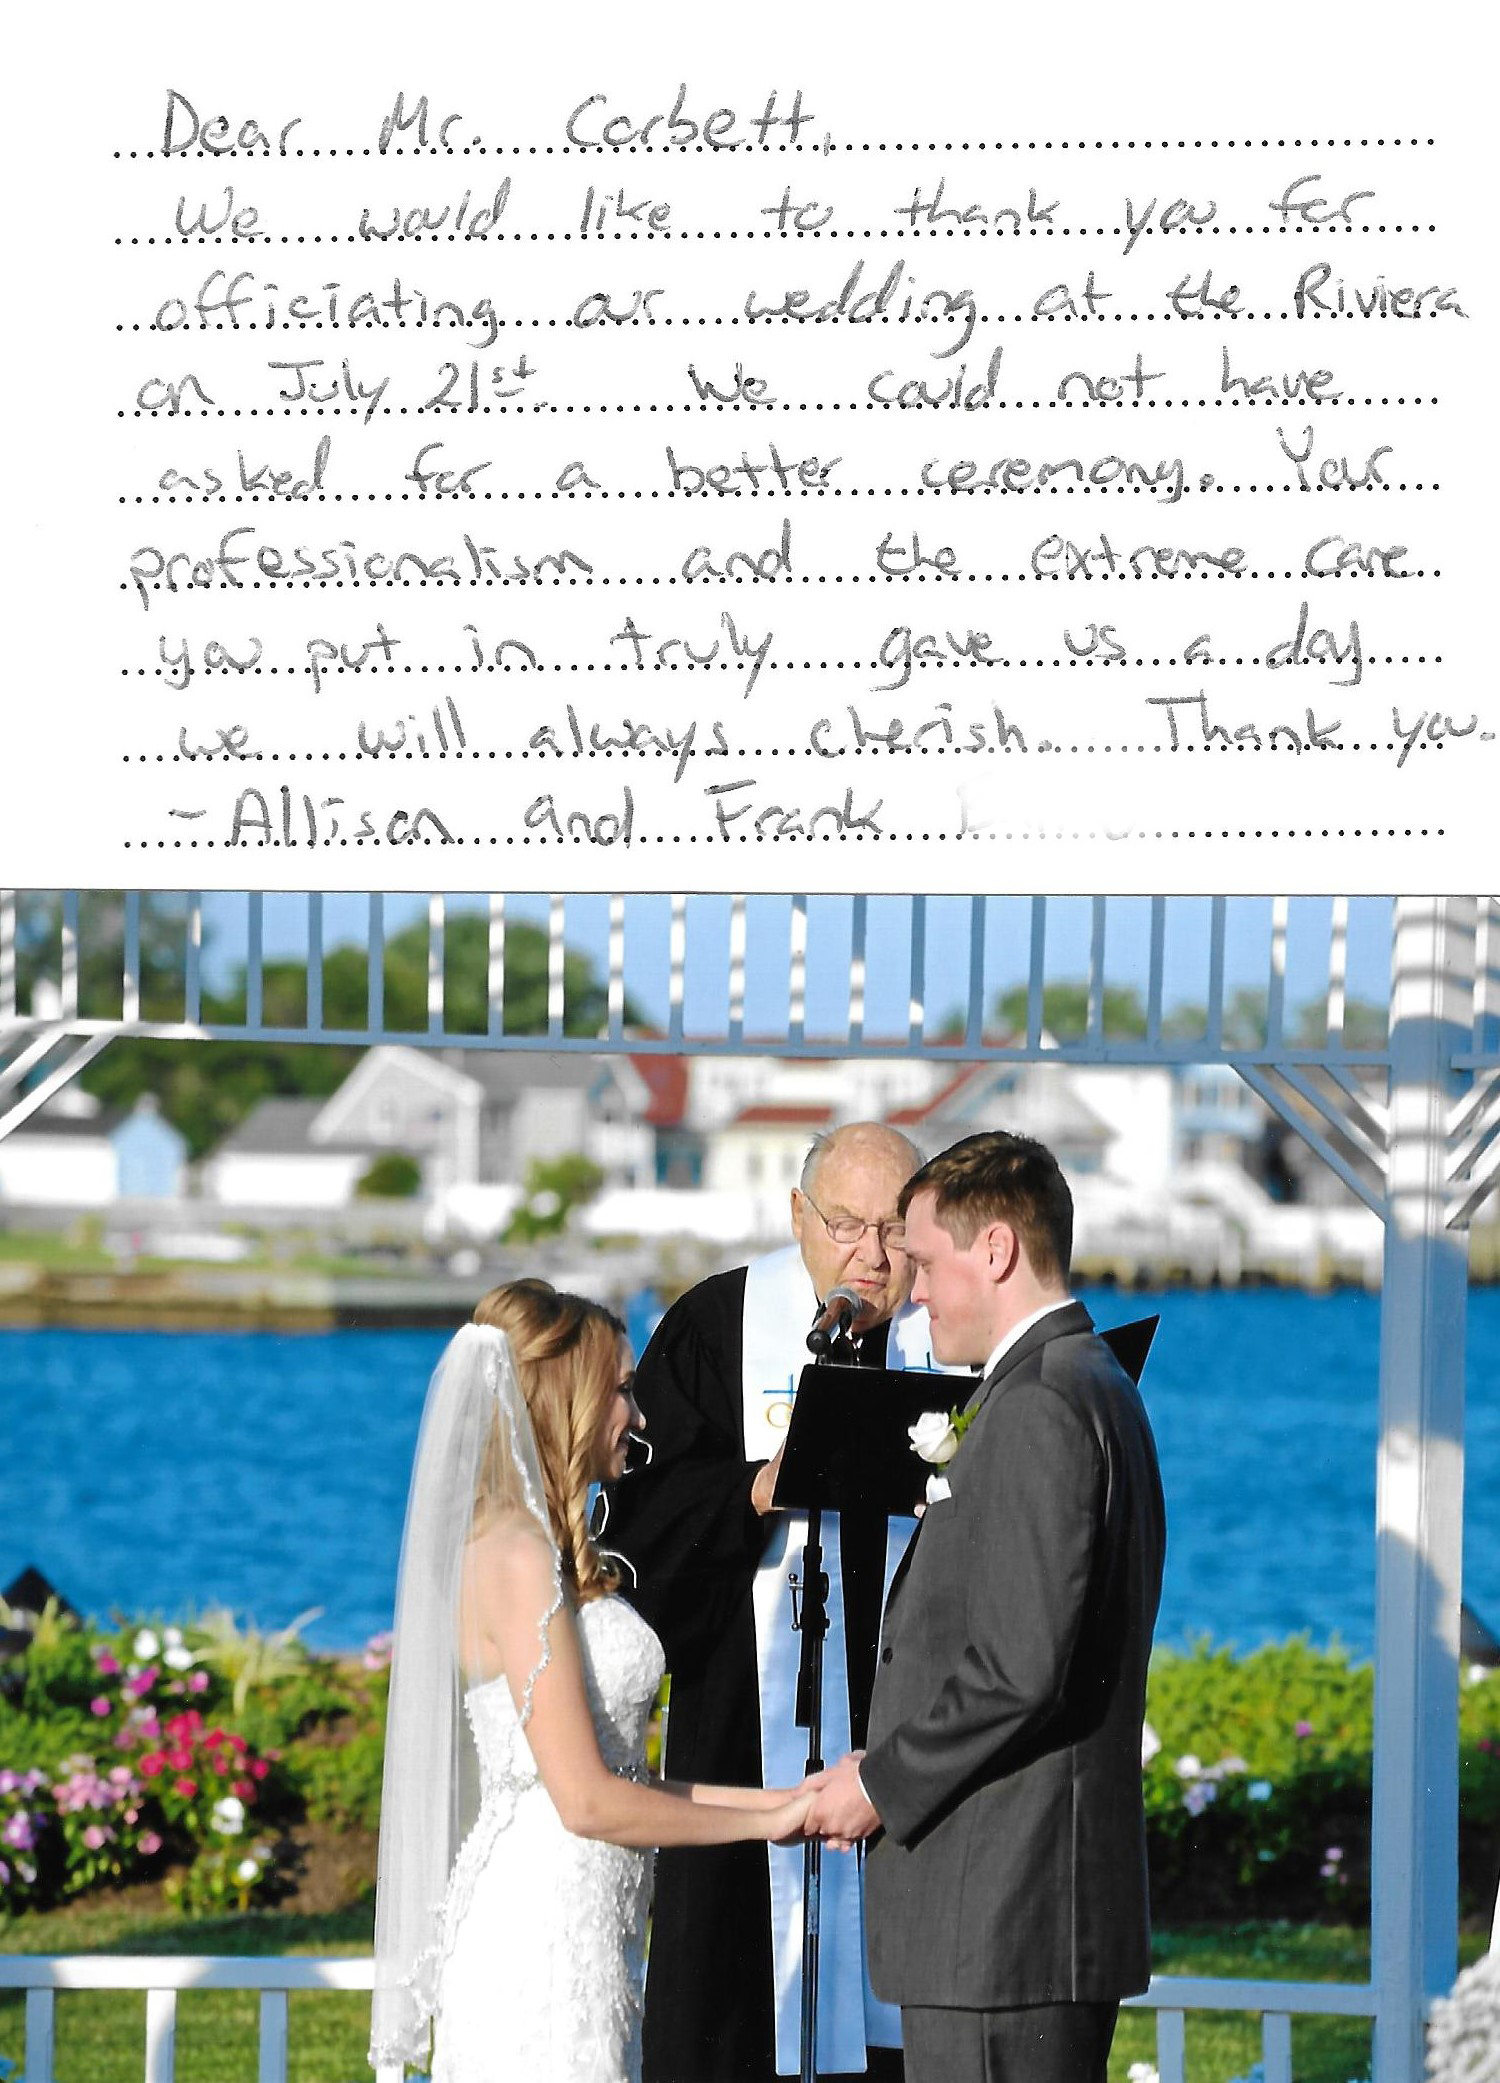 Best Wedding Officiants NYC - Reviews